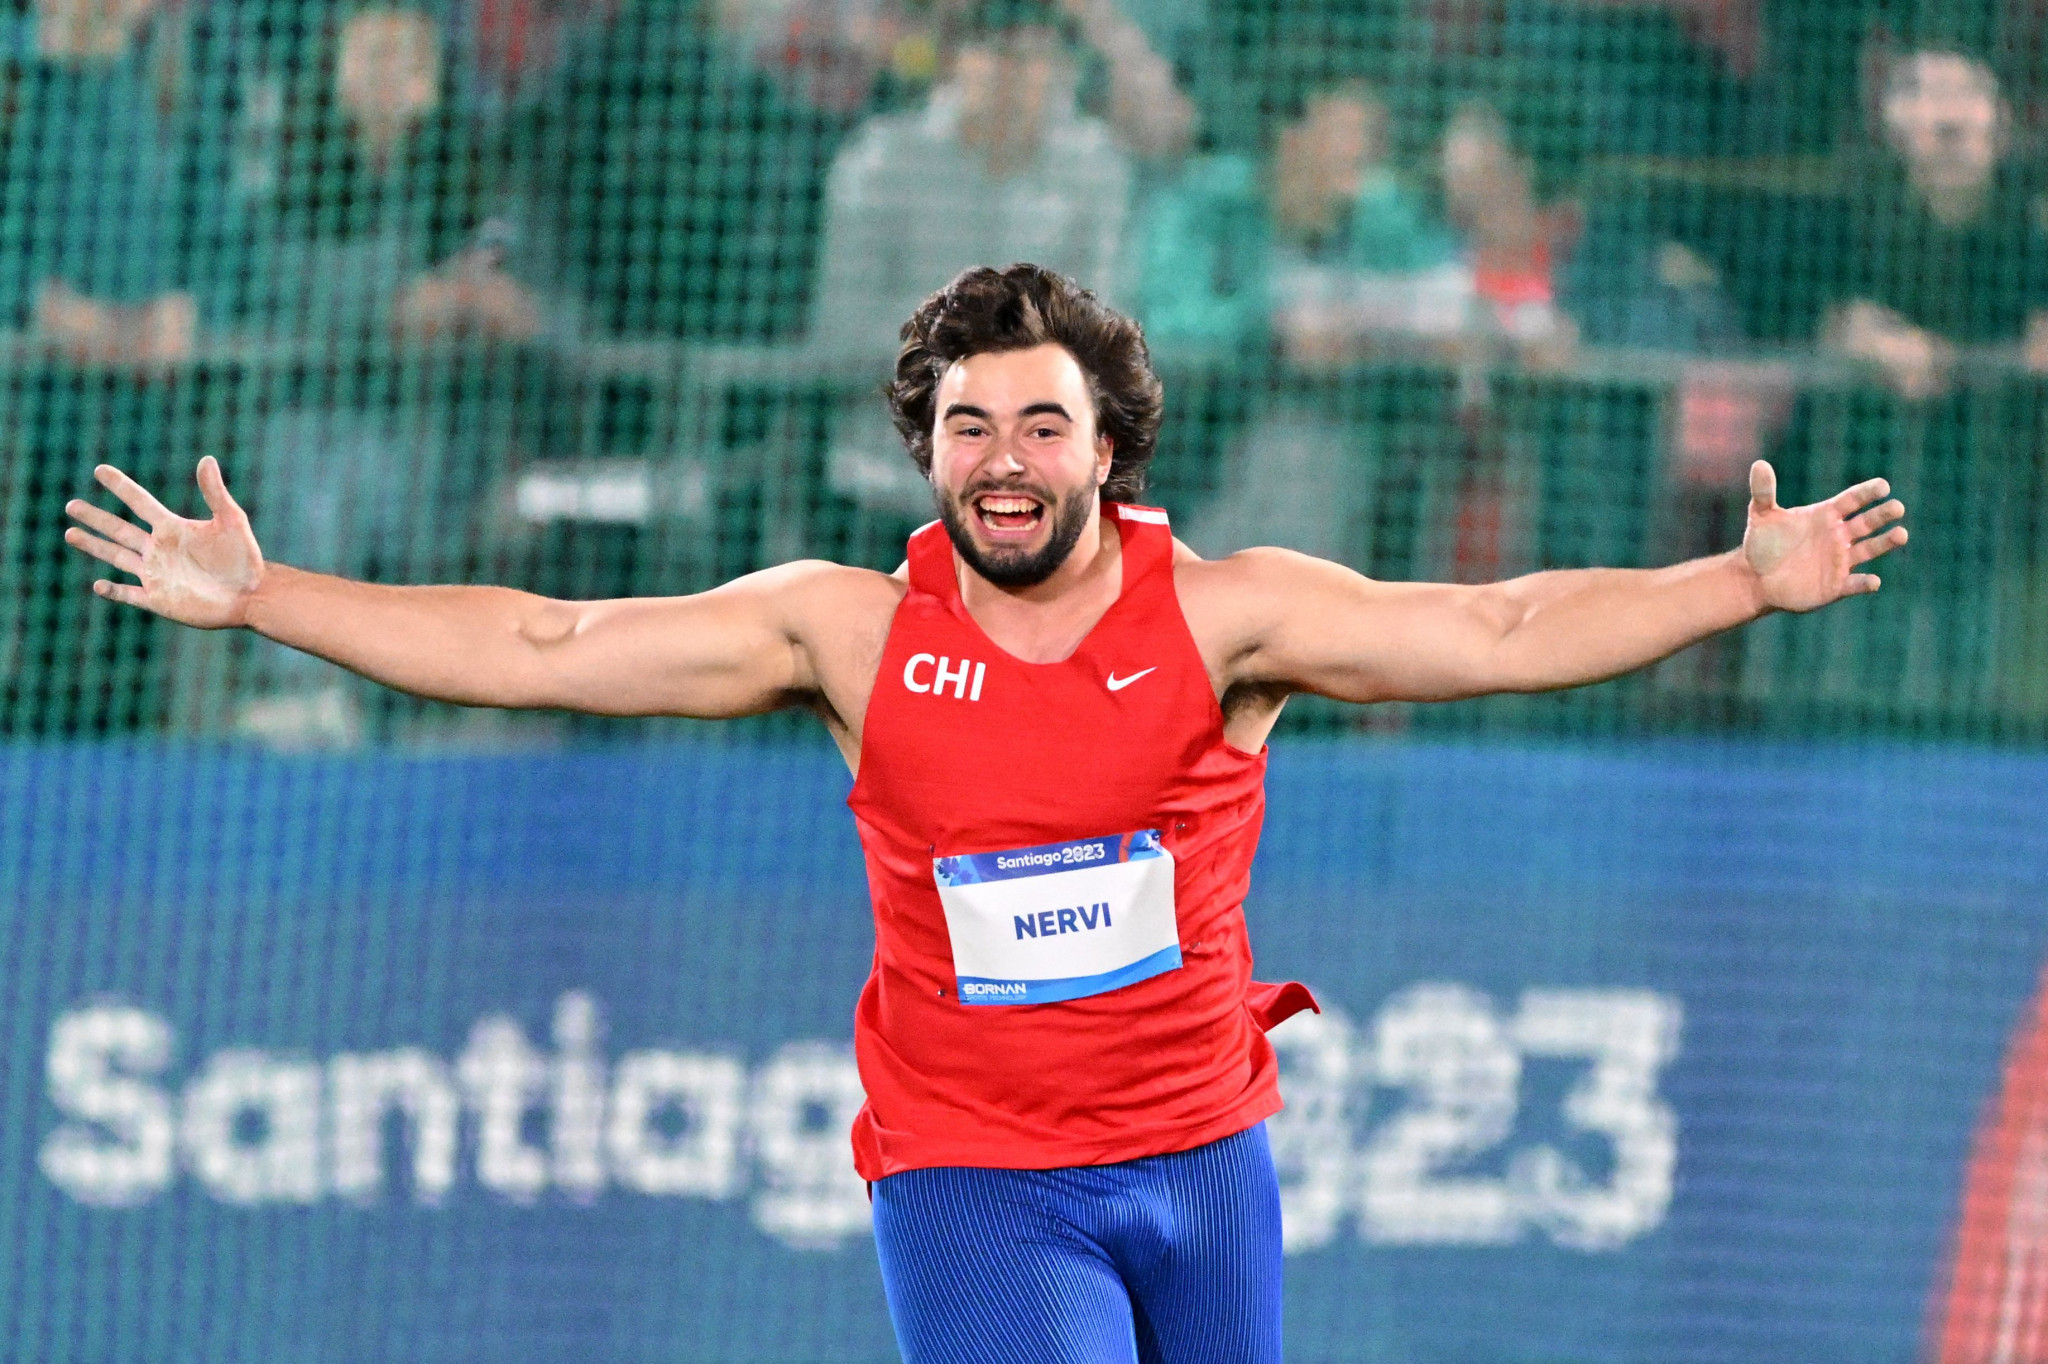 Chile's Lucas Nervi triumphed in the men's discus at the Pan American Games in Santiago ©Getty Images